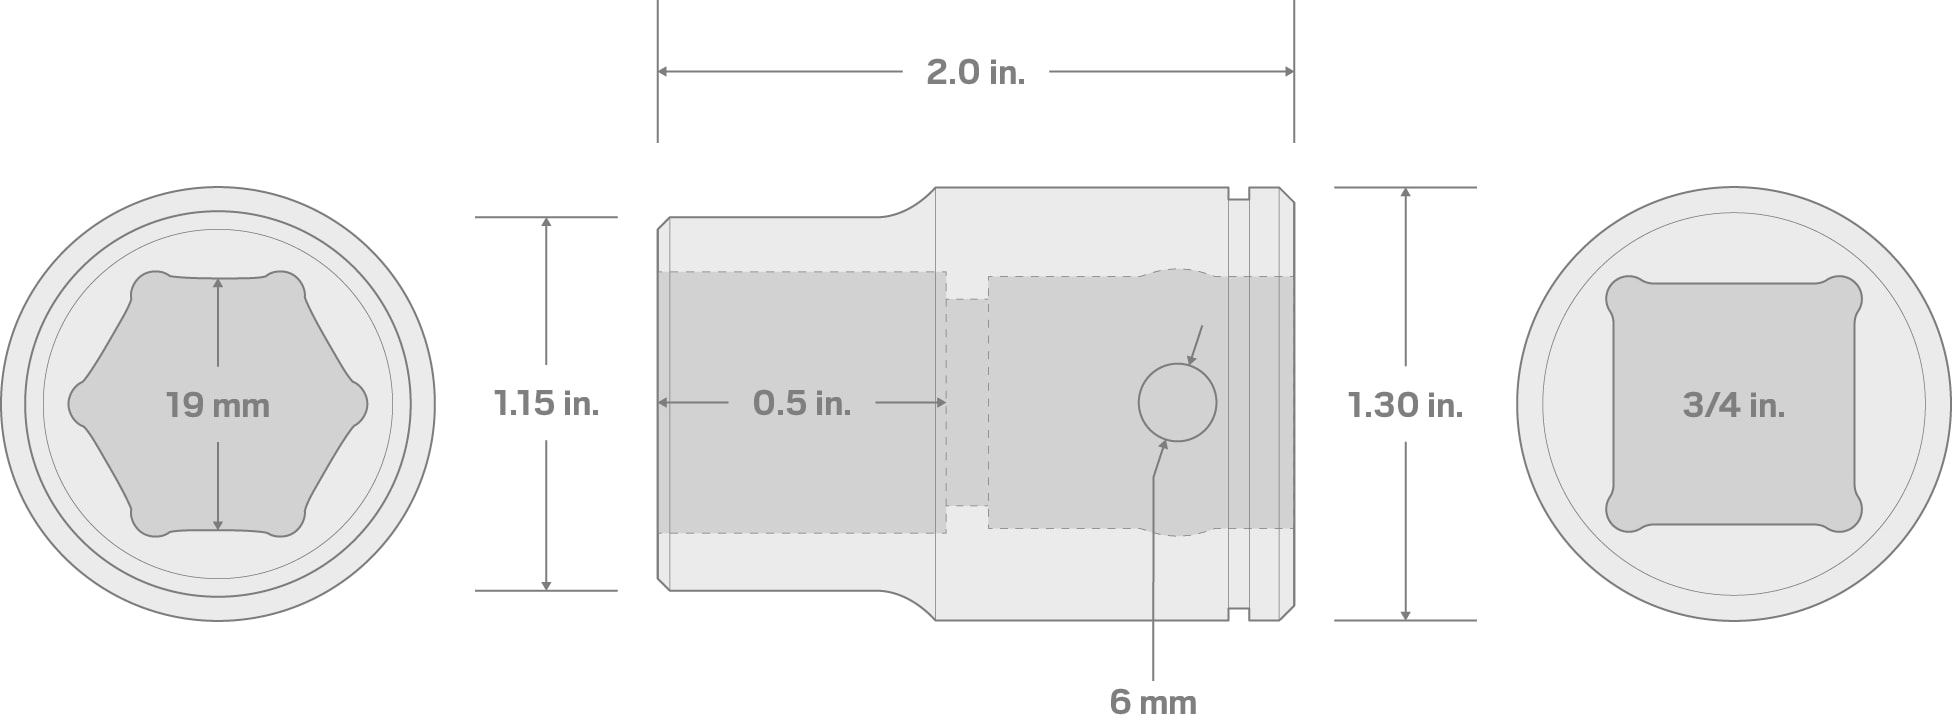 Specs for 3/4 Inch Drive x 19 mm 6-Point Socket